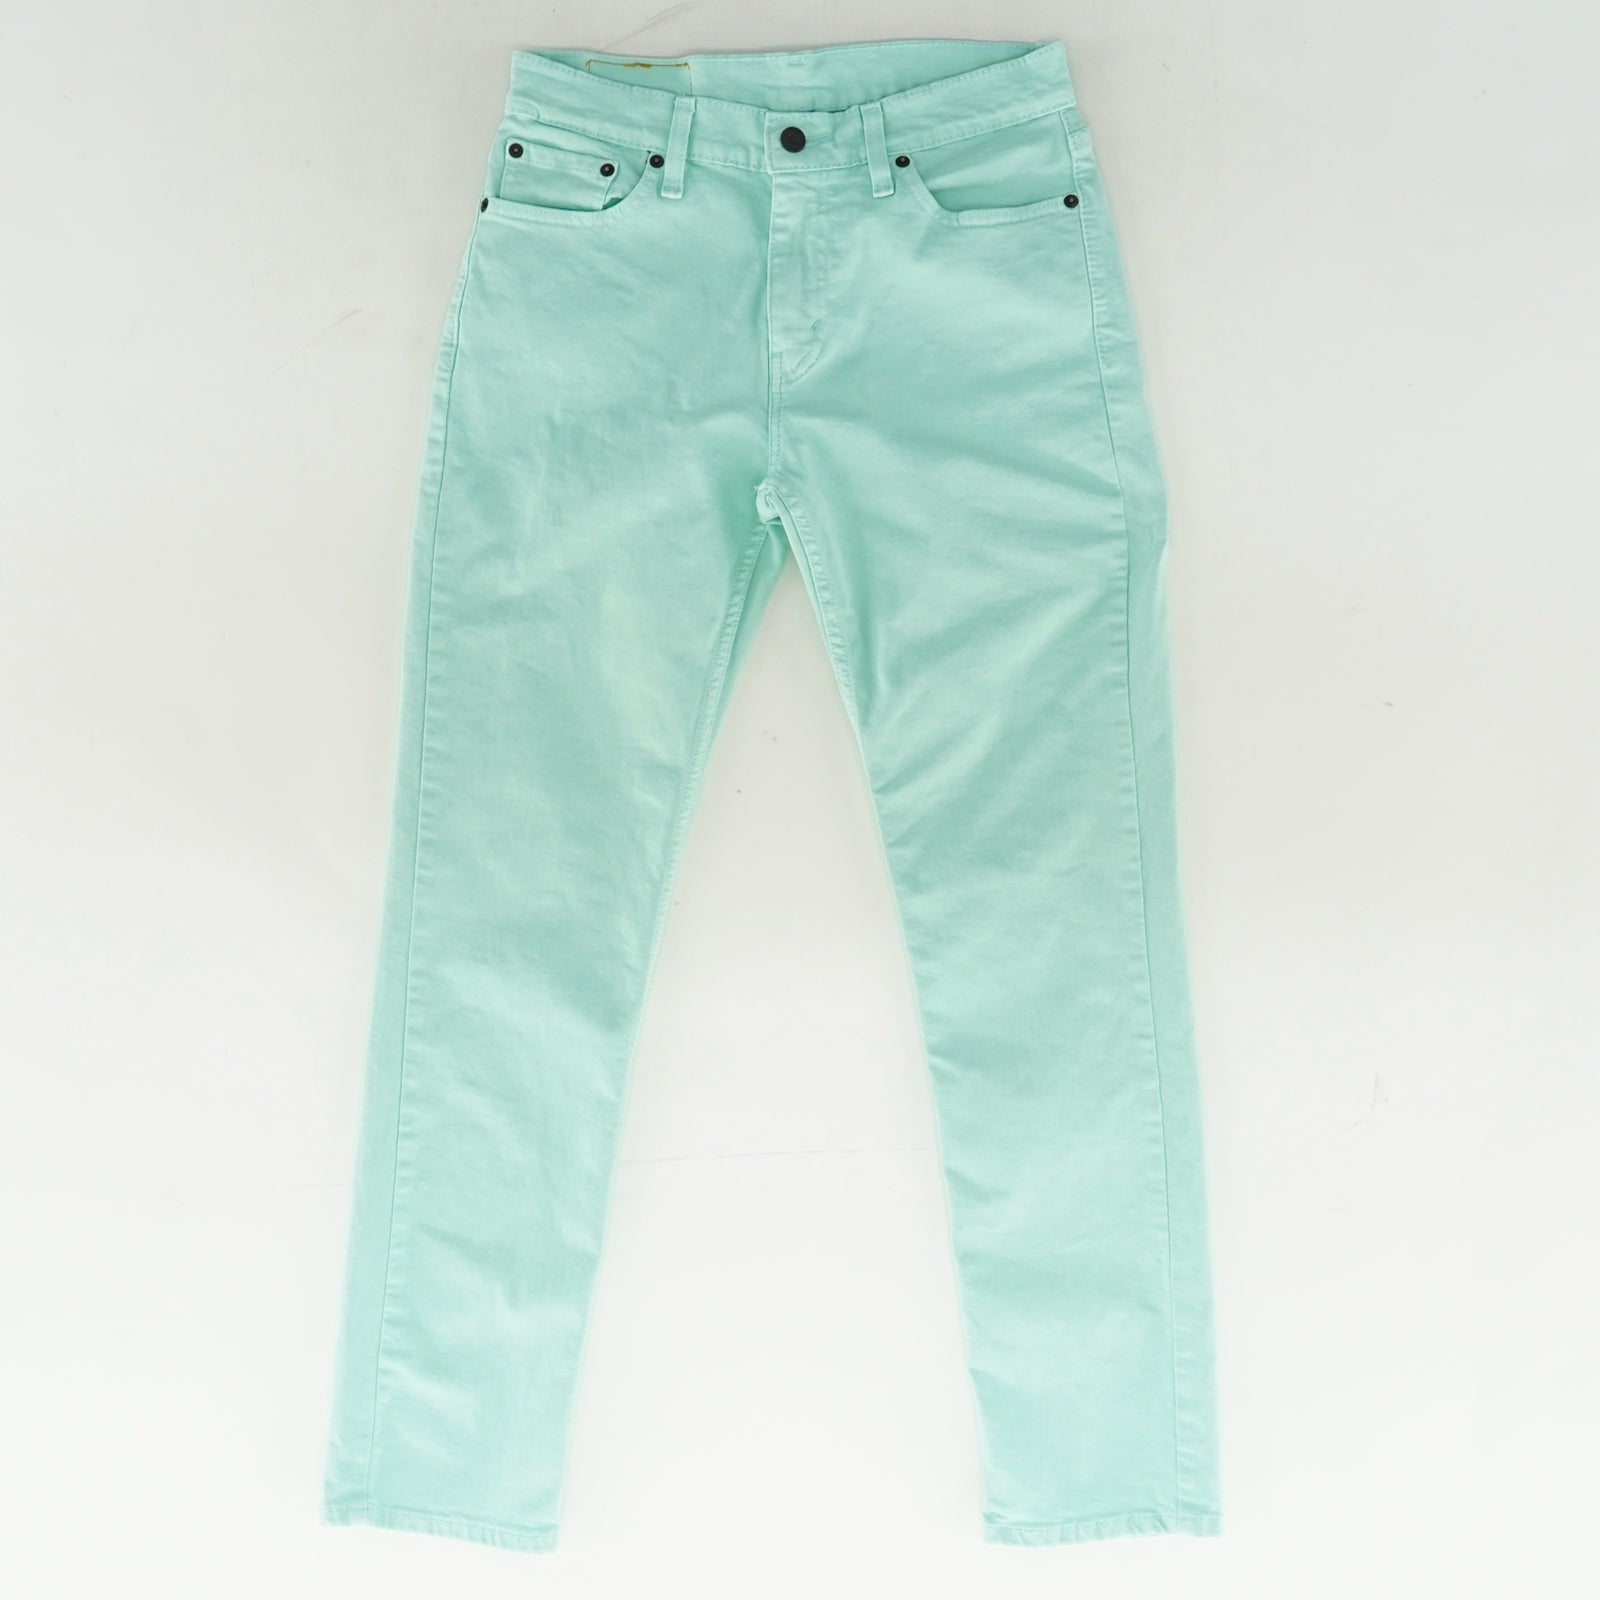 Green Shrink To Fit Straight Leg Jeans Size 30x30 30x32 32x32 Unclaimed Baggage